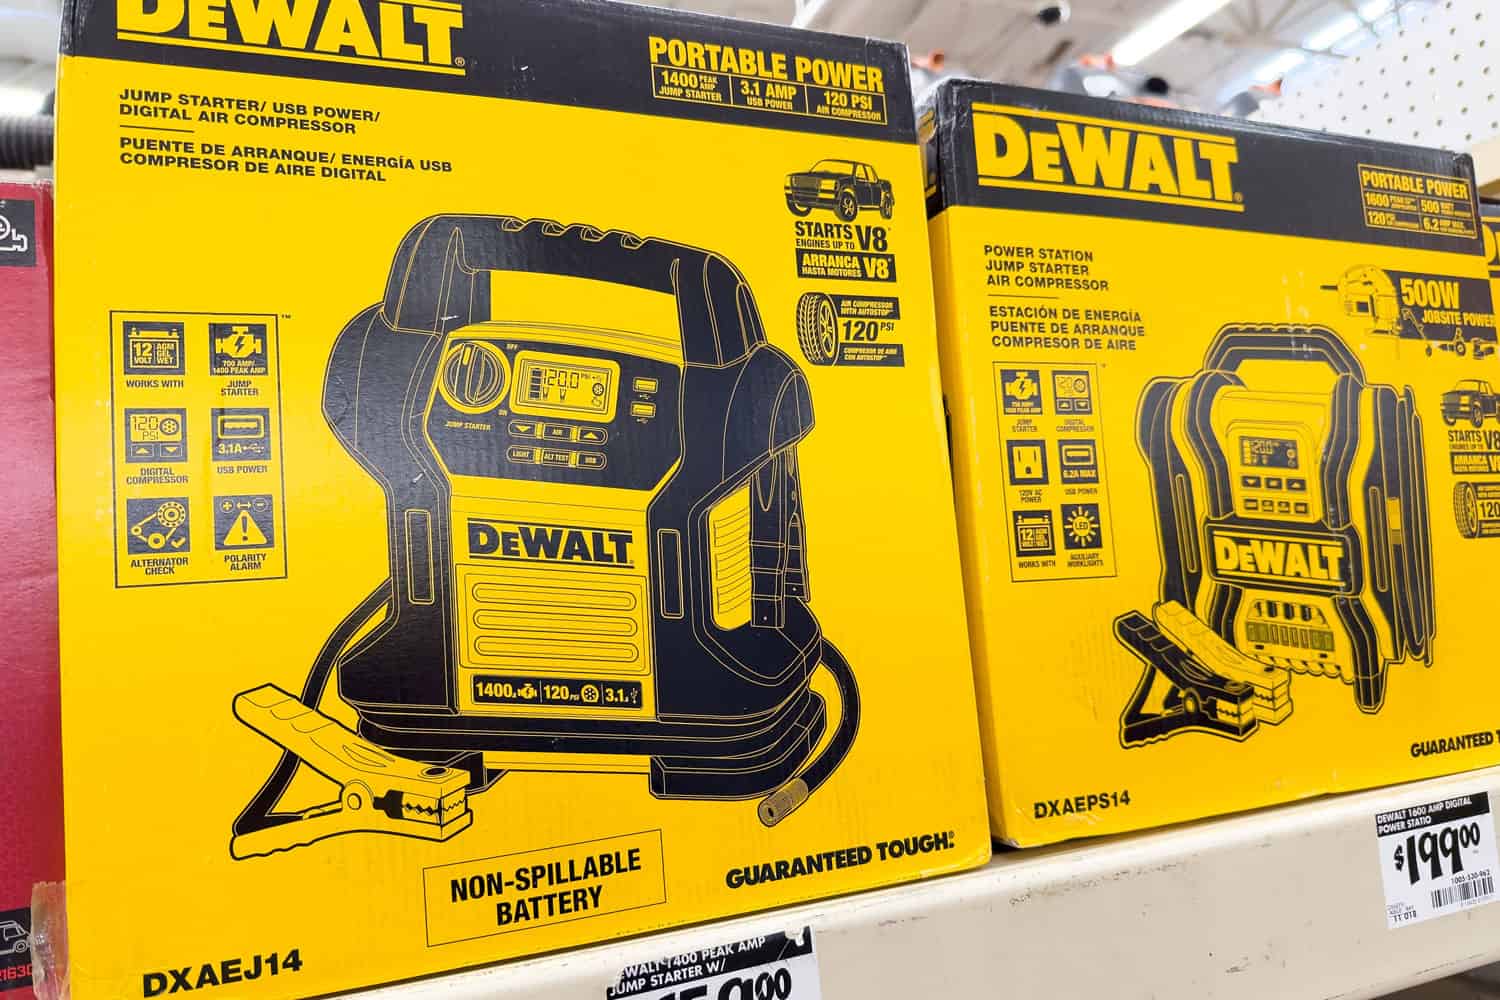 New Dewalt Portable Battery Pack for jump starting cars and inflating tires.